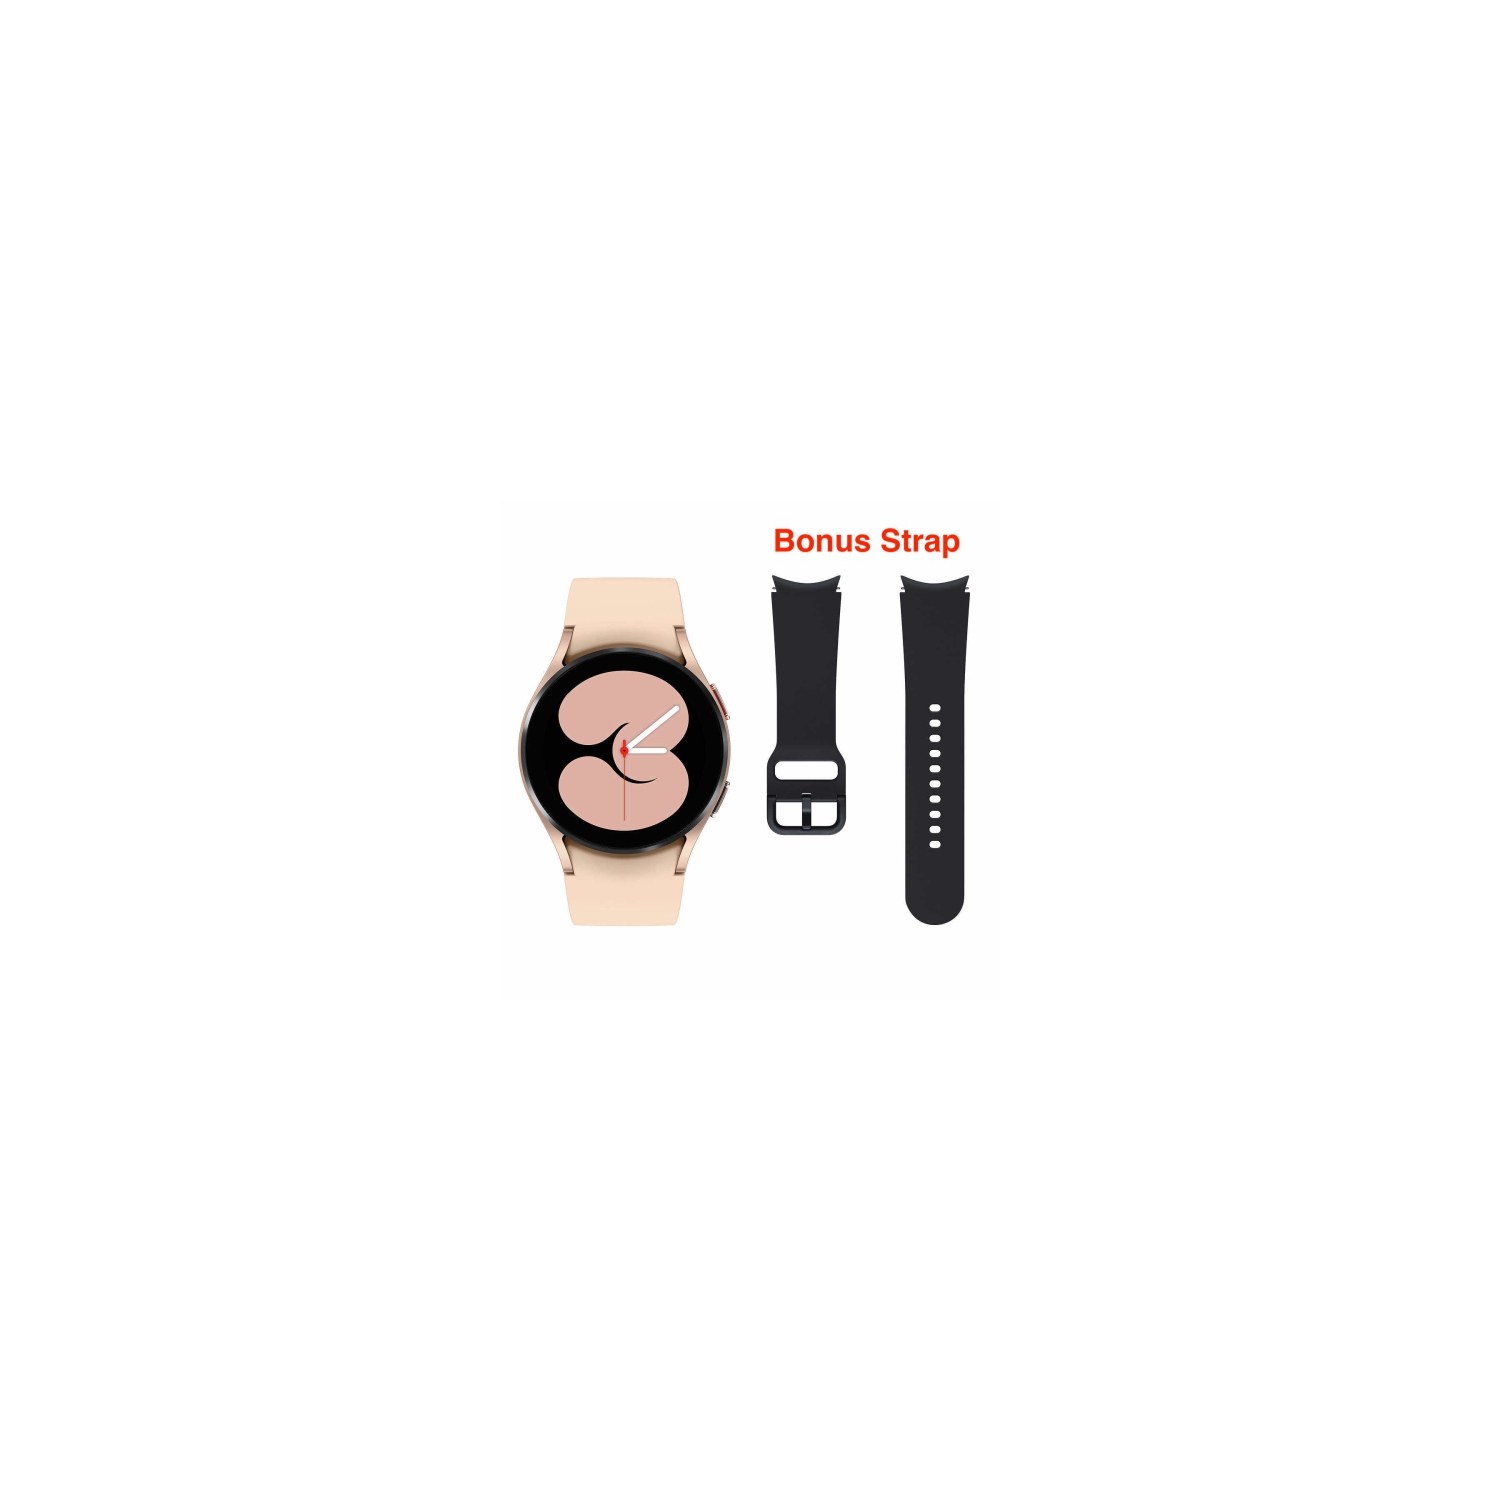 Refurbished (Good) - Samsung Galaxy Watch 4 40mm Smartwatch with Heart Rate Monitor ( Includes additional strap in black ) - Pink Gold